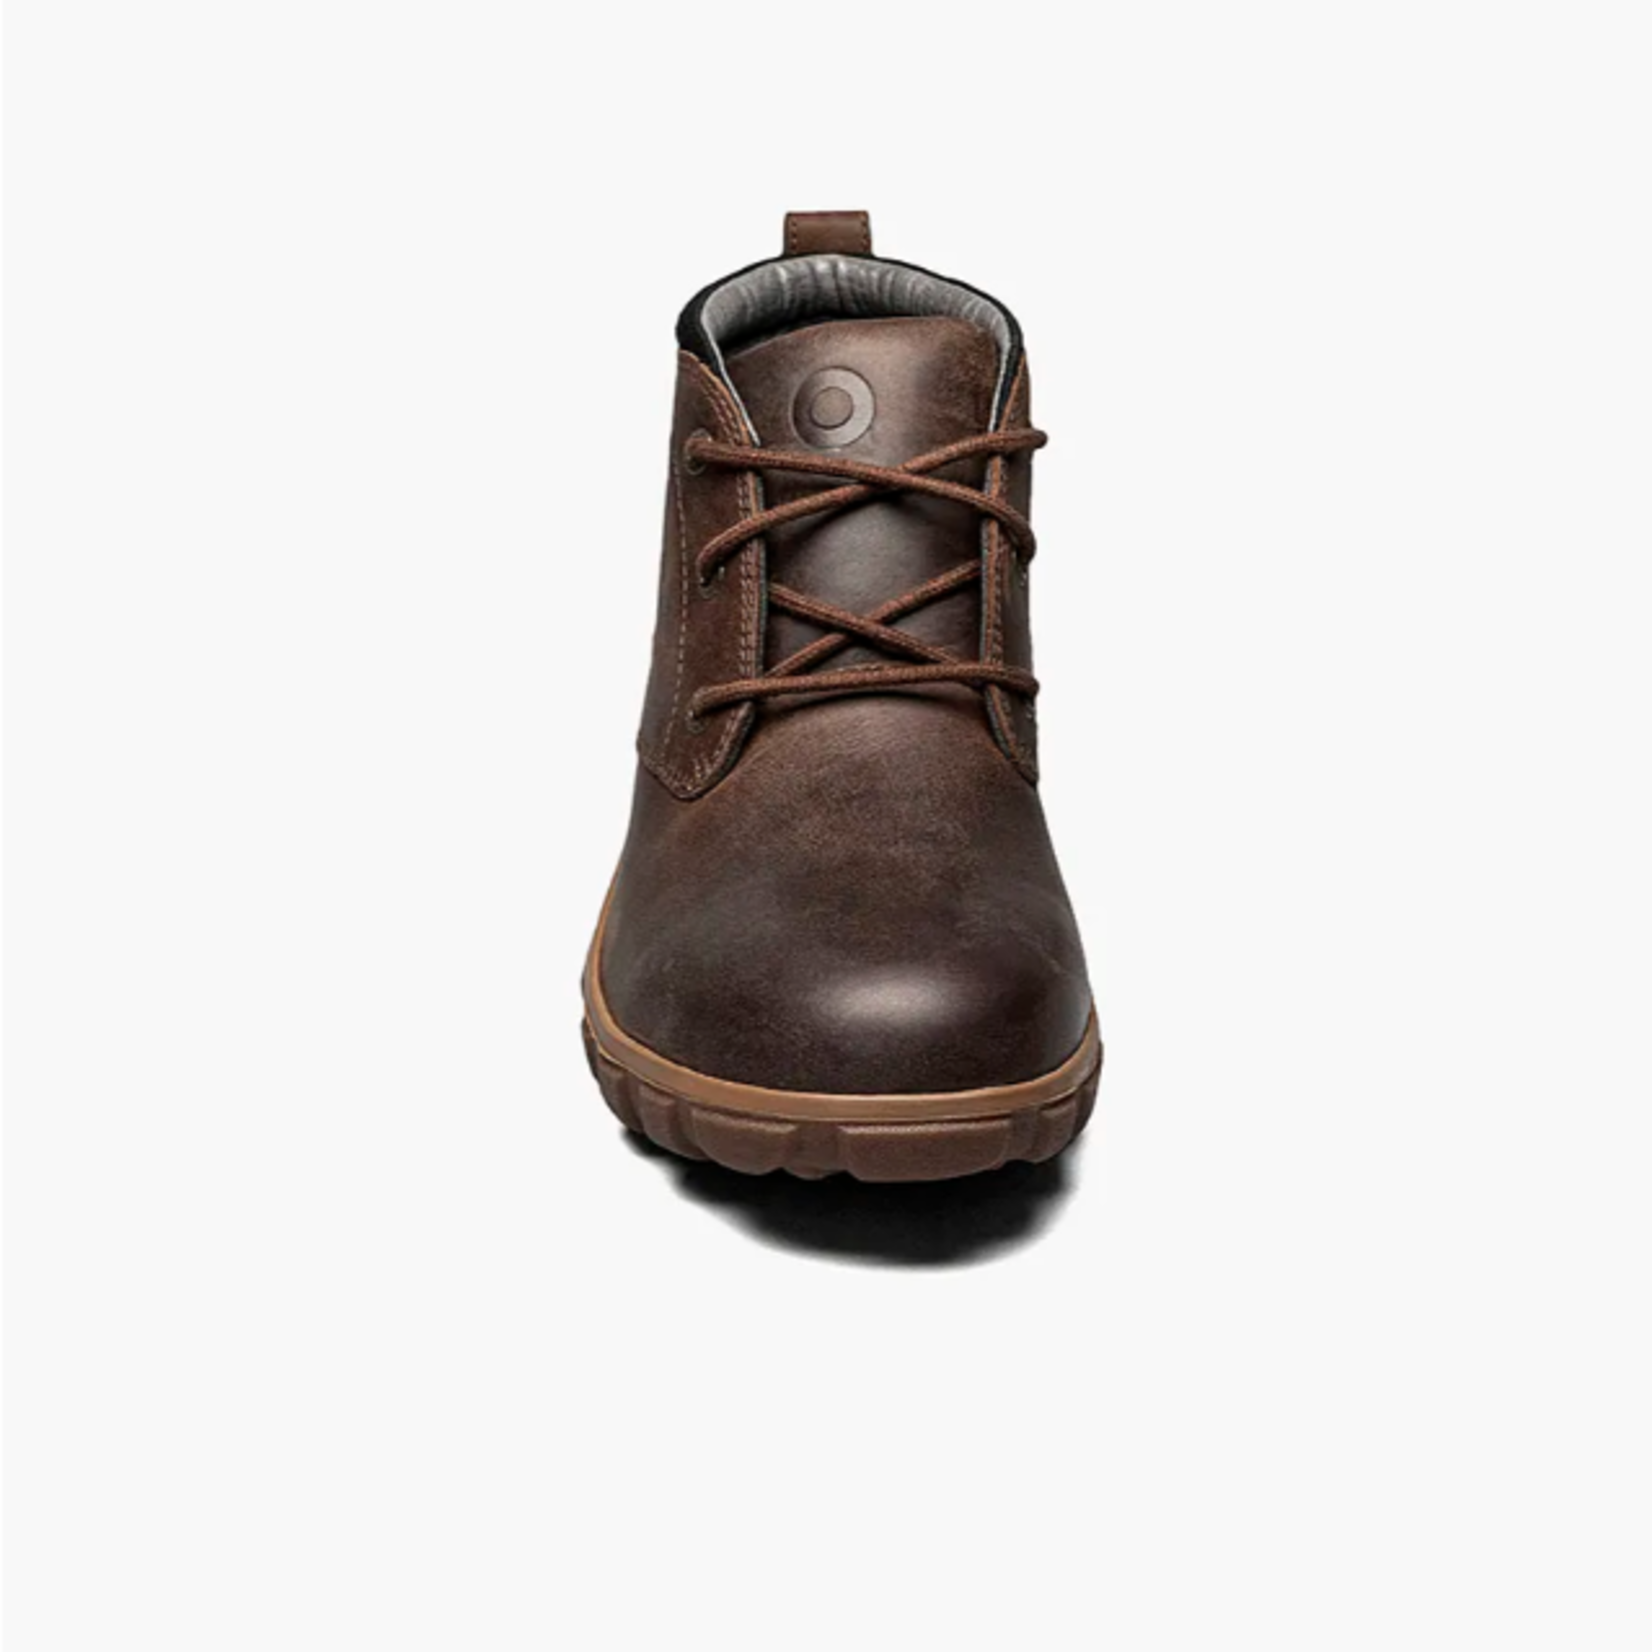 Bogs Bogs M’s Classic Casual Chukka